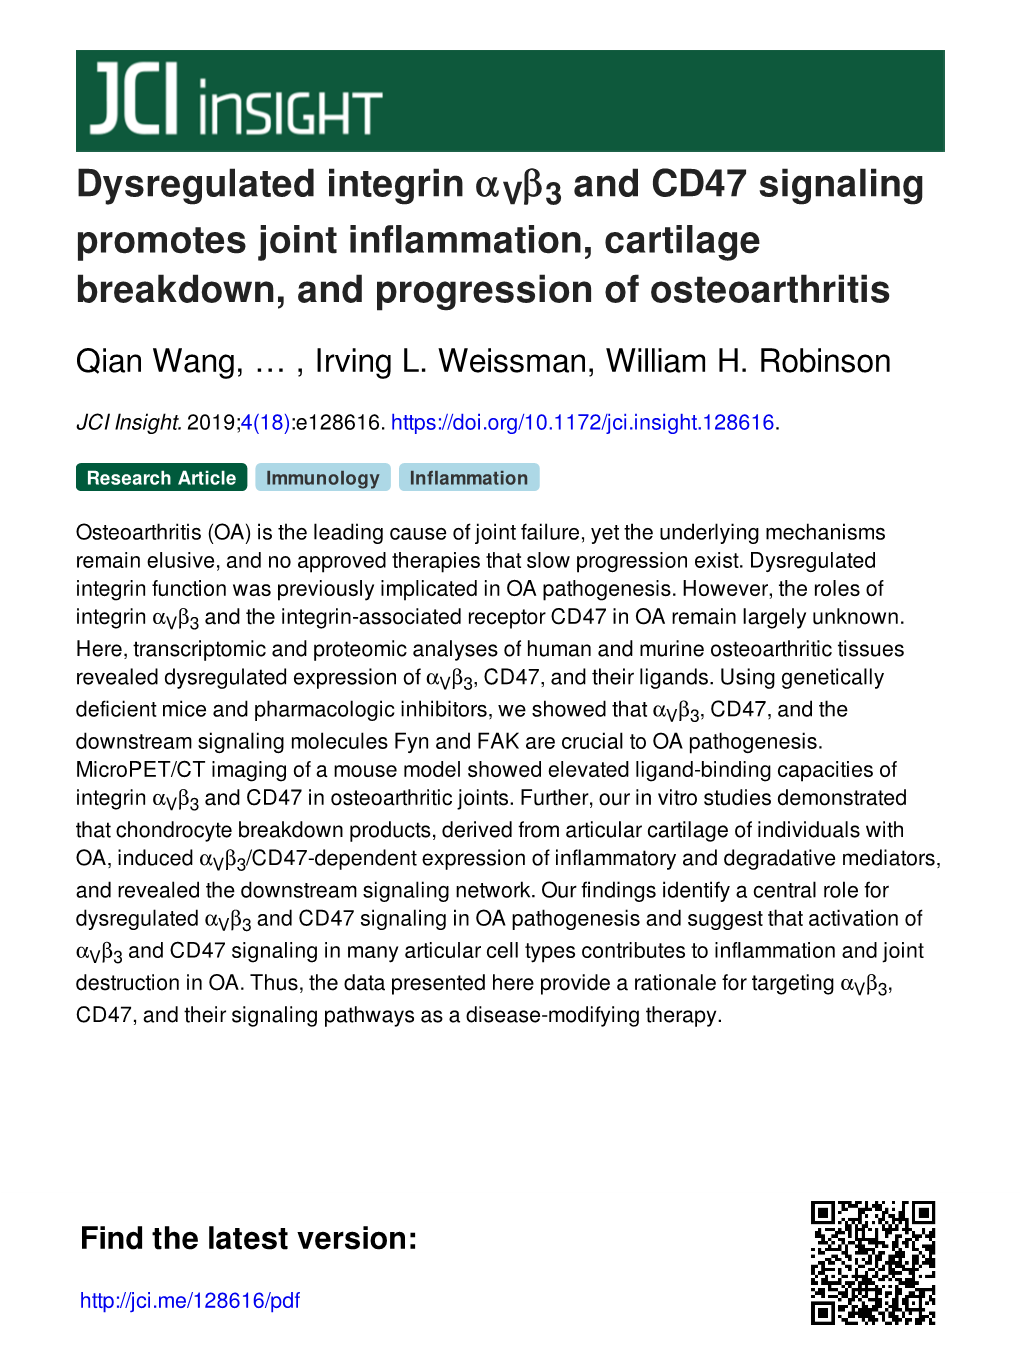 Dysregulated Integrin Av B3 and CD47 Signaling Promotes Joint